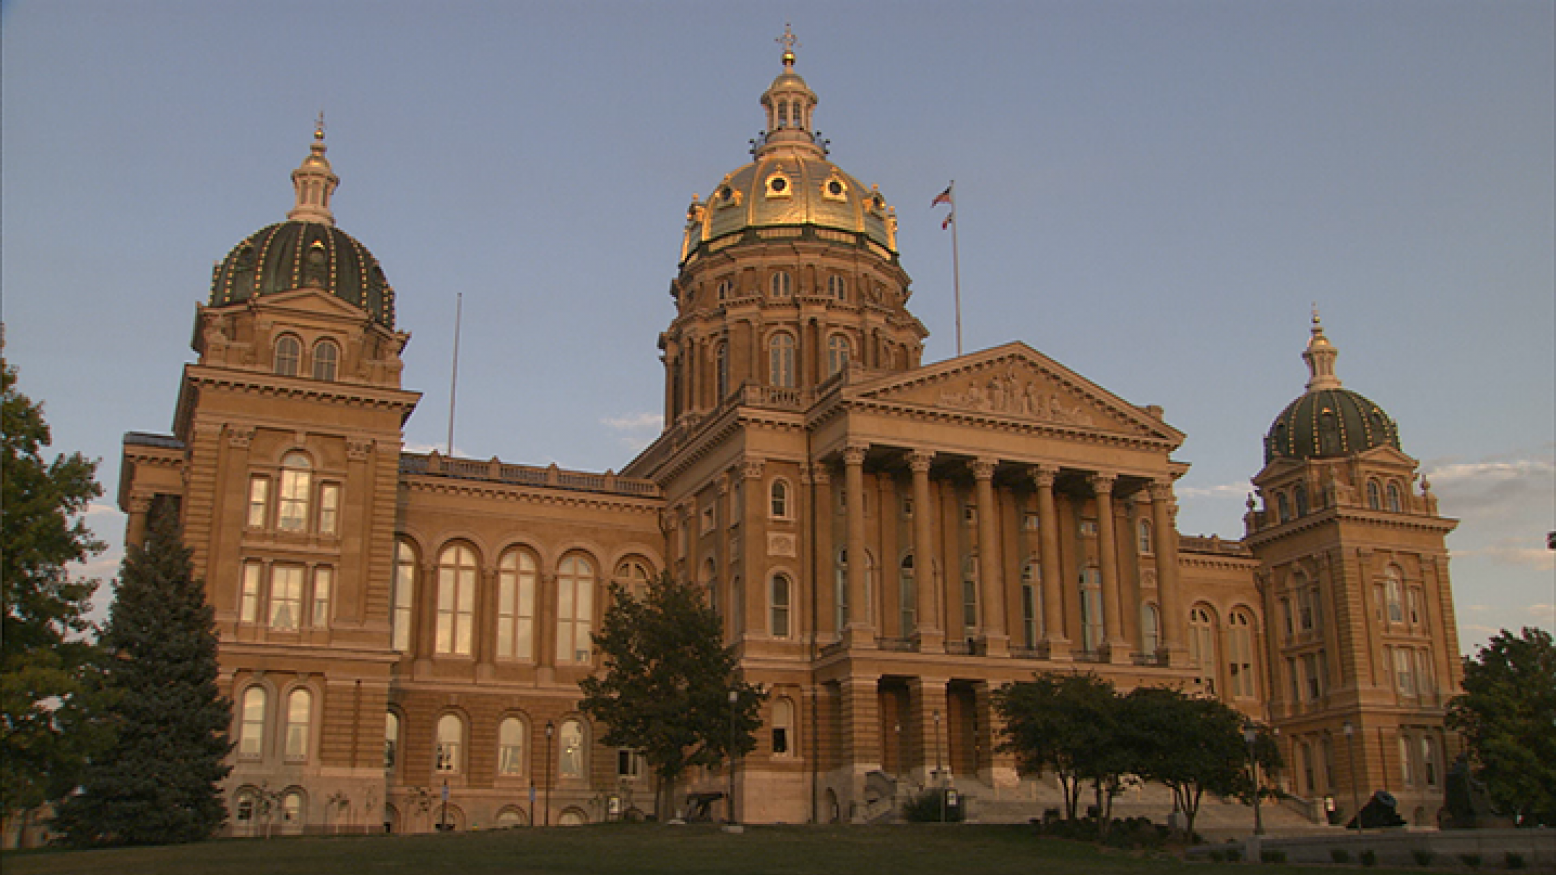 An image of the Iowa State Capitol taken from the lawn. A few trees stand in front of the building, which features multiple domes. The largest dome is in the center and is gold. 